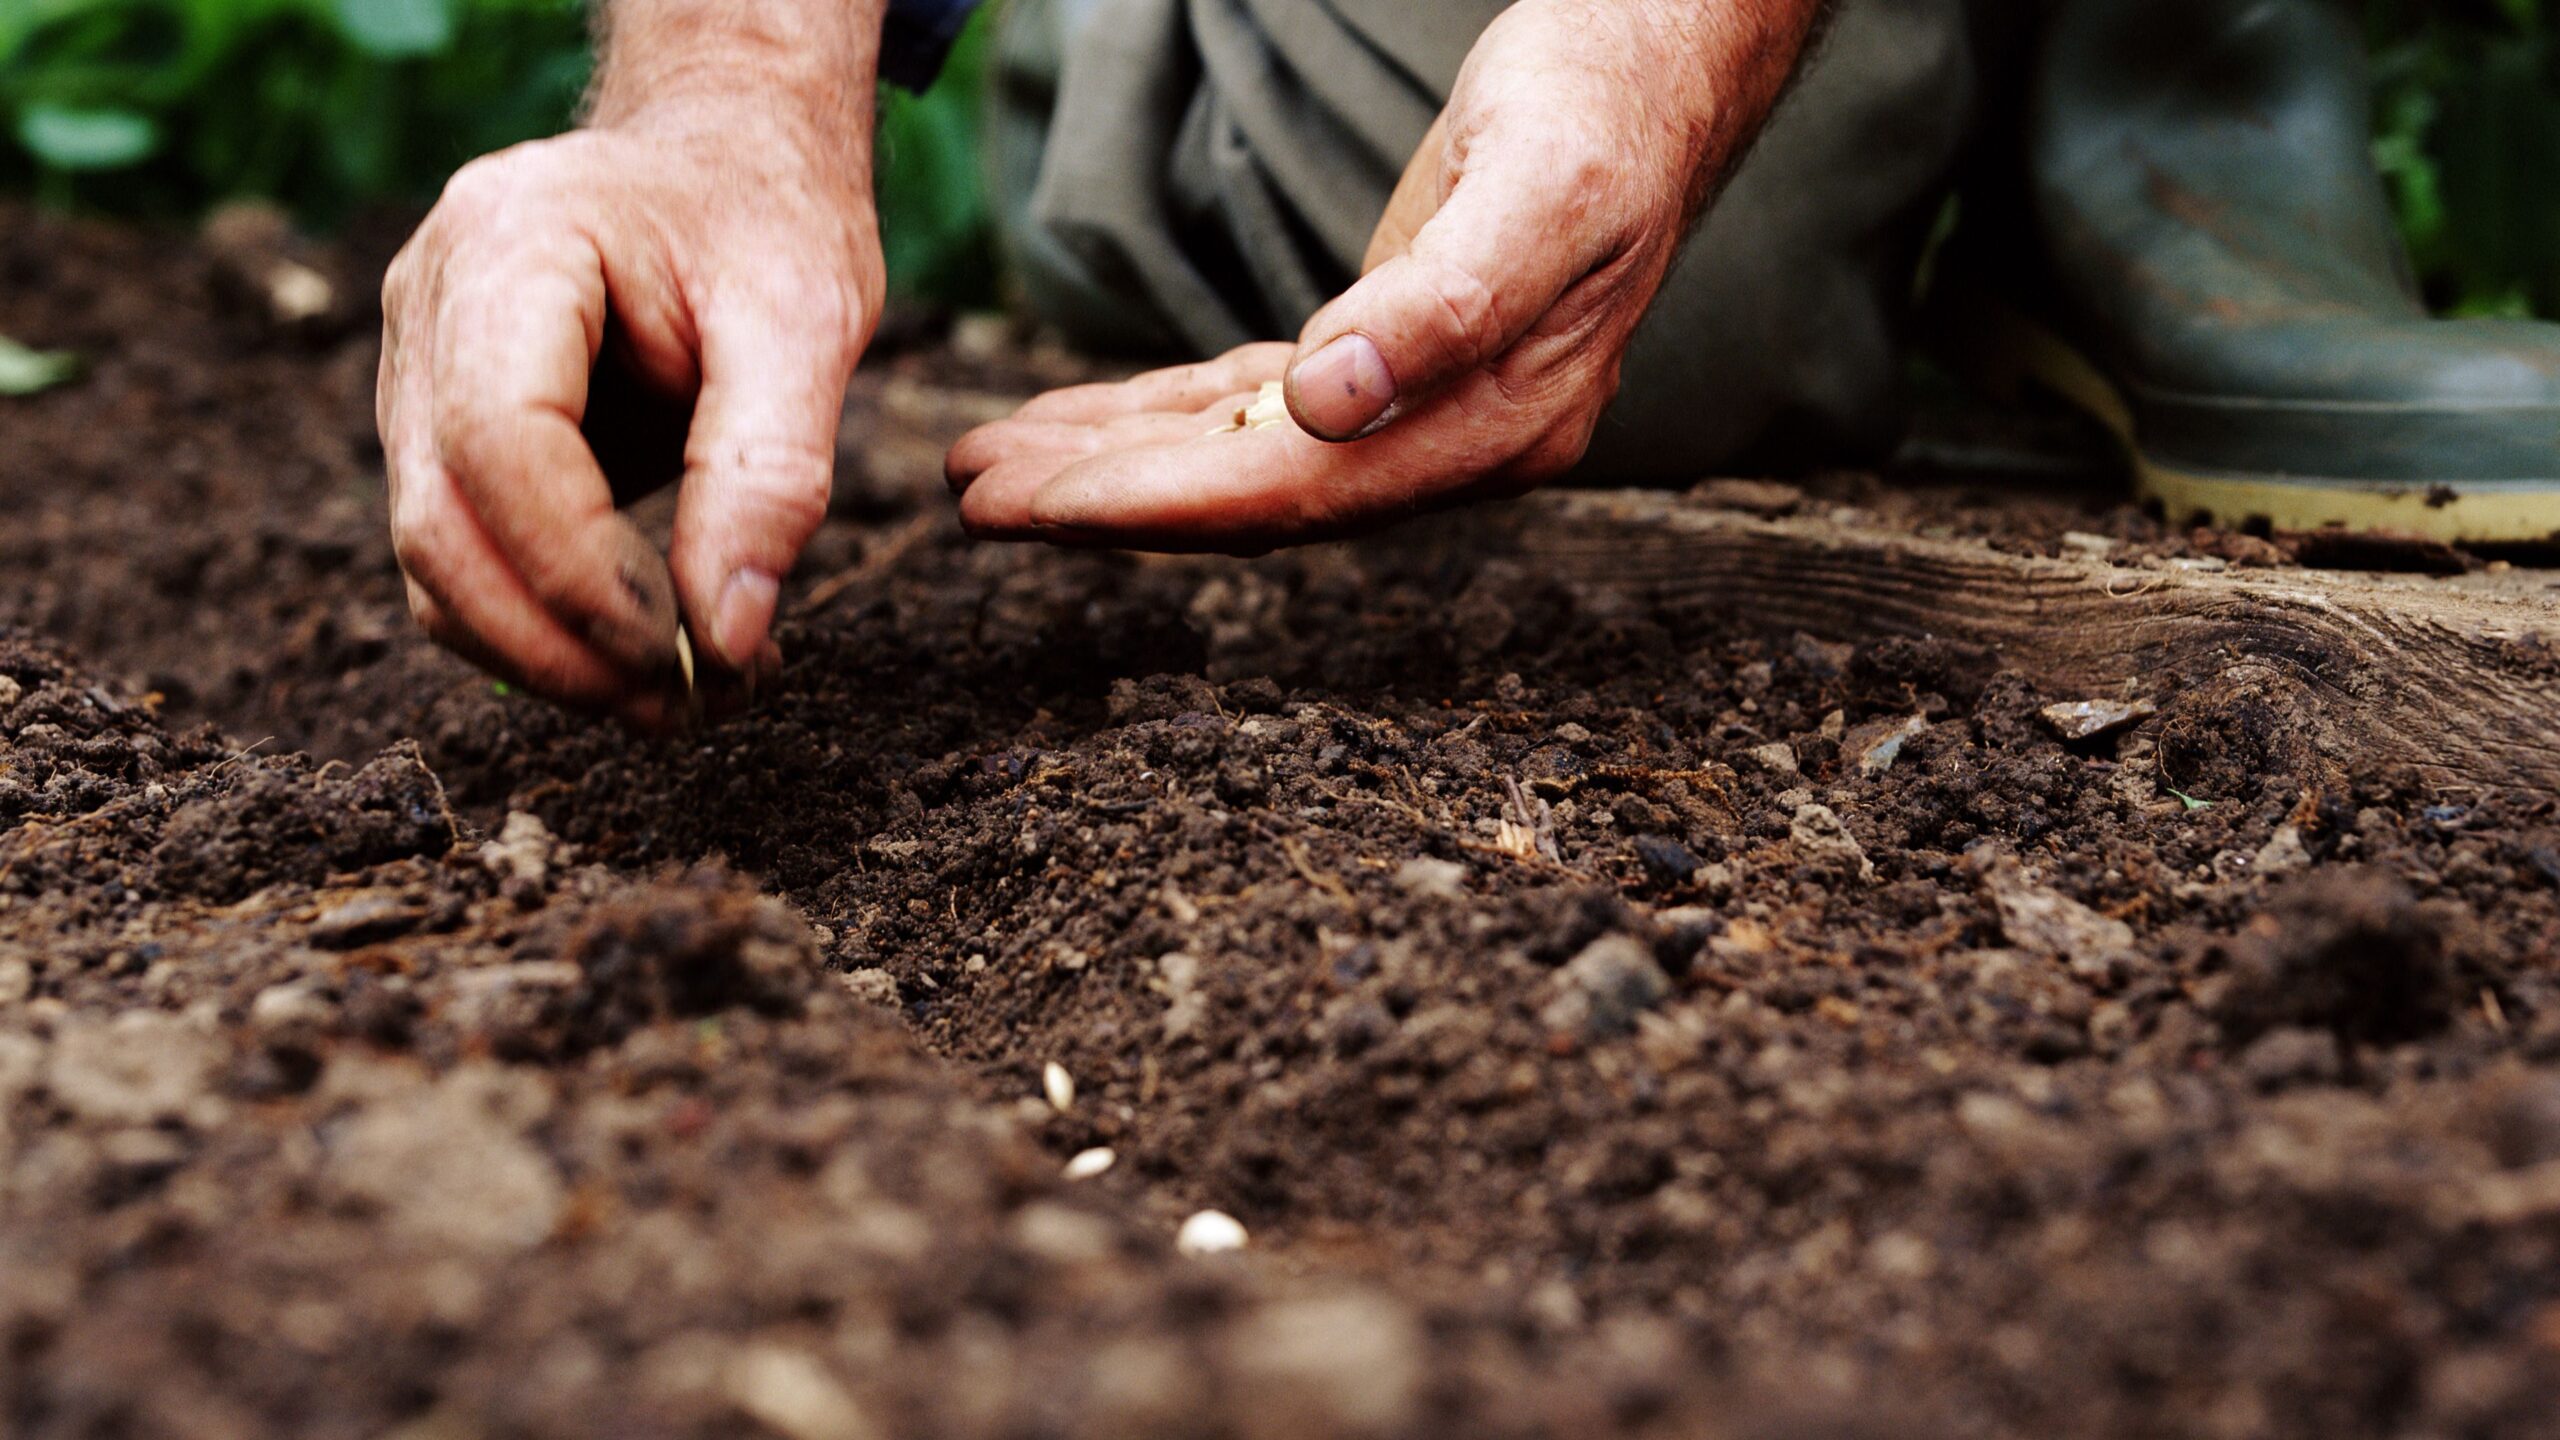 Review-the-seed-growing-practices-scaled How to Choose Quality Seeds for Your Lawn and Garden